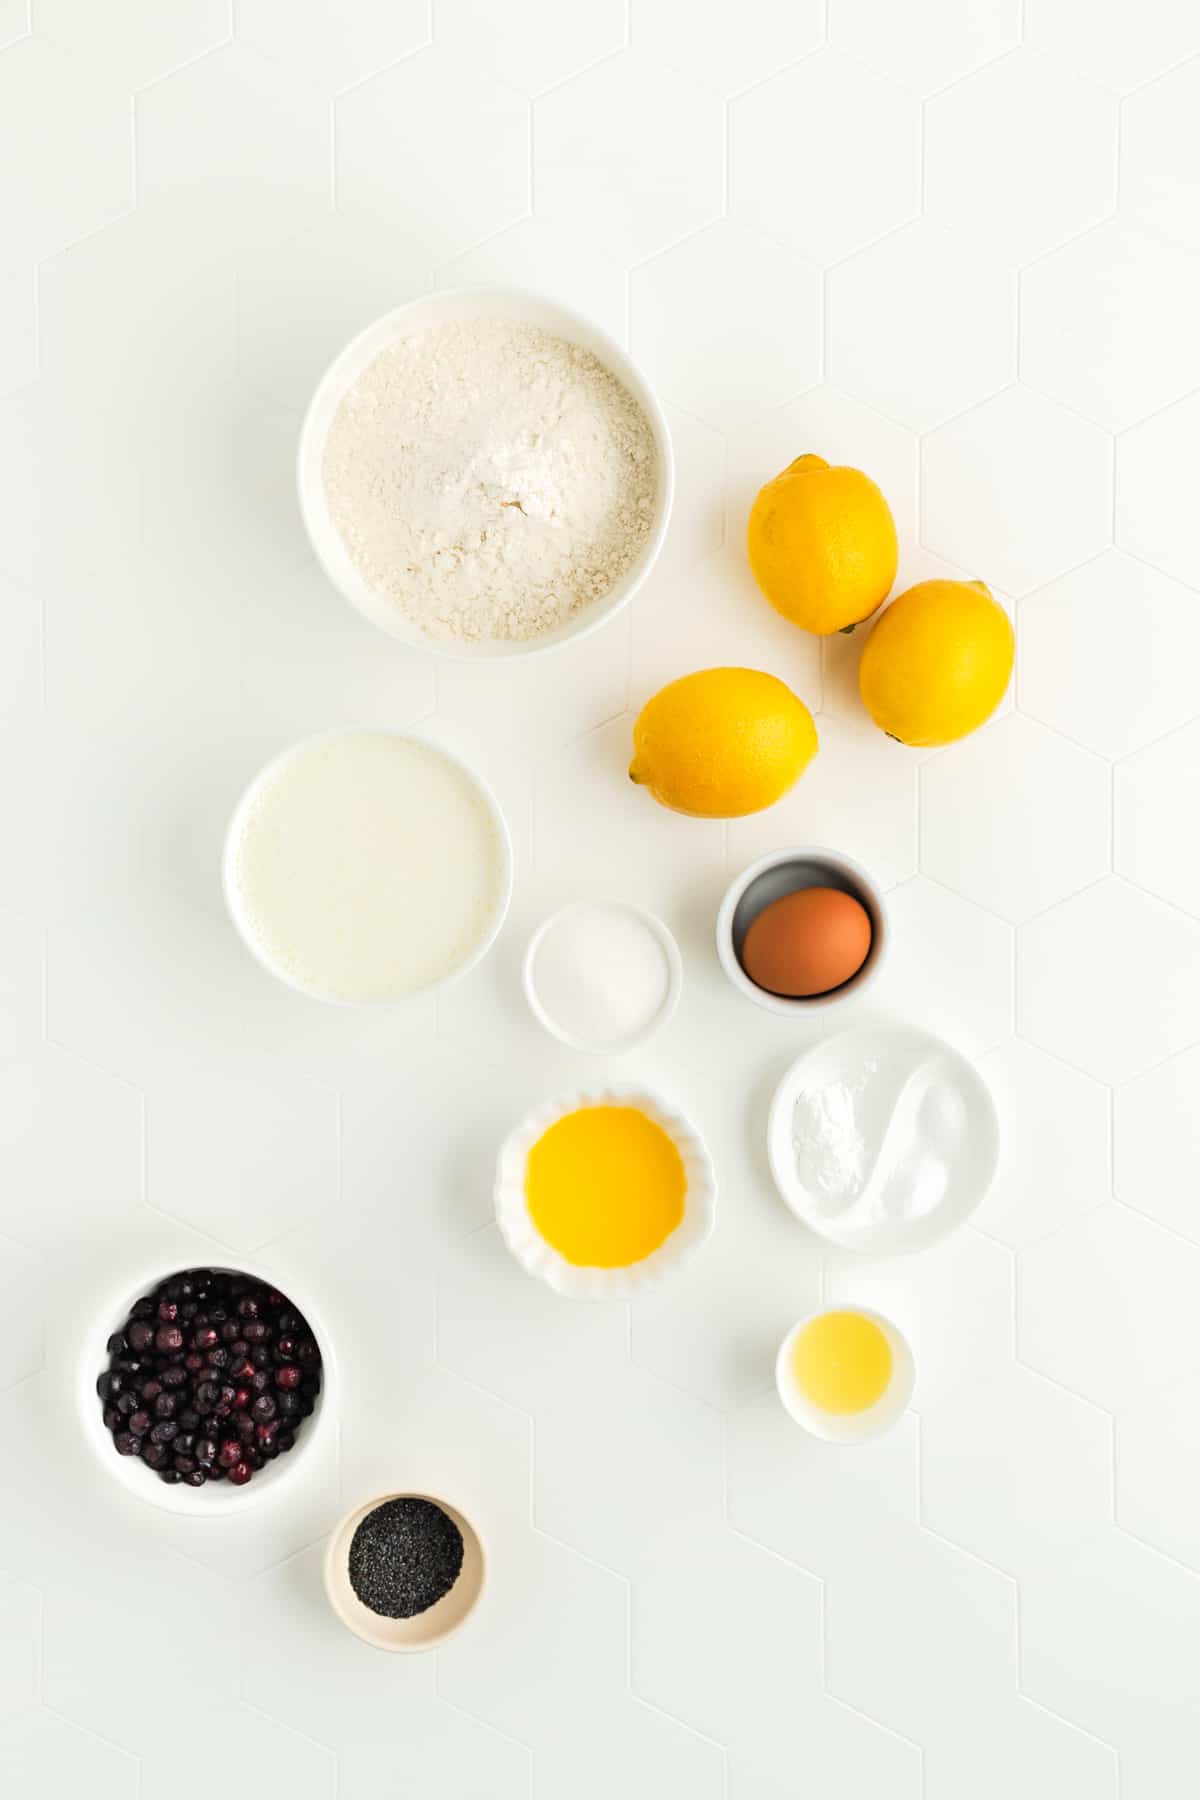 Ingredients for lemon pancakes in individual bowls on white background.